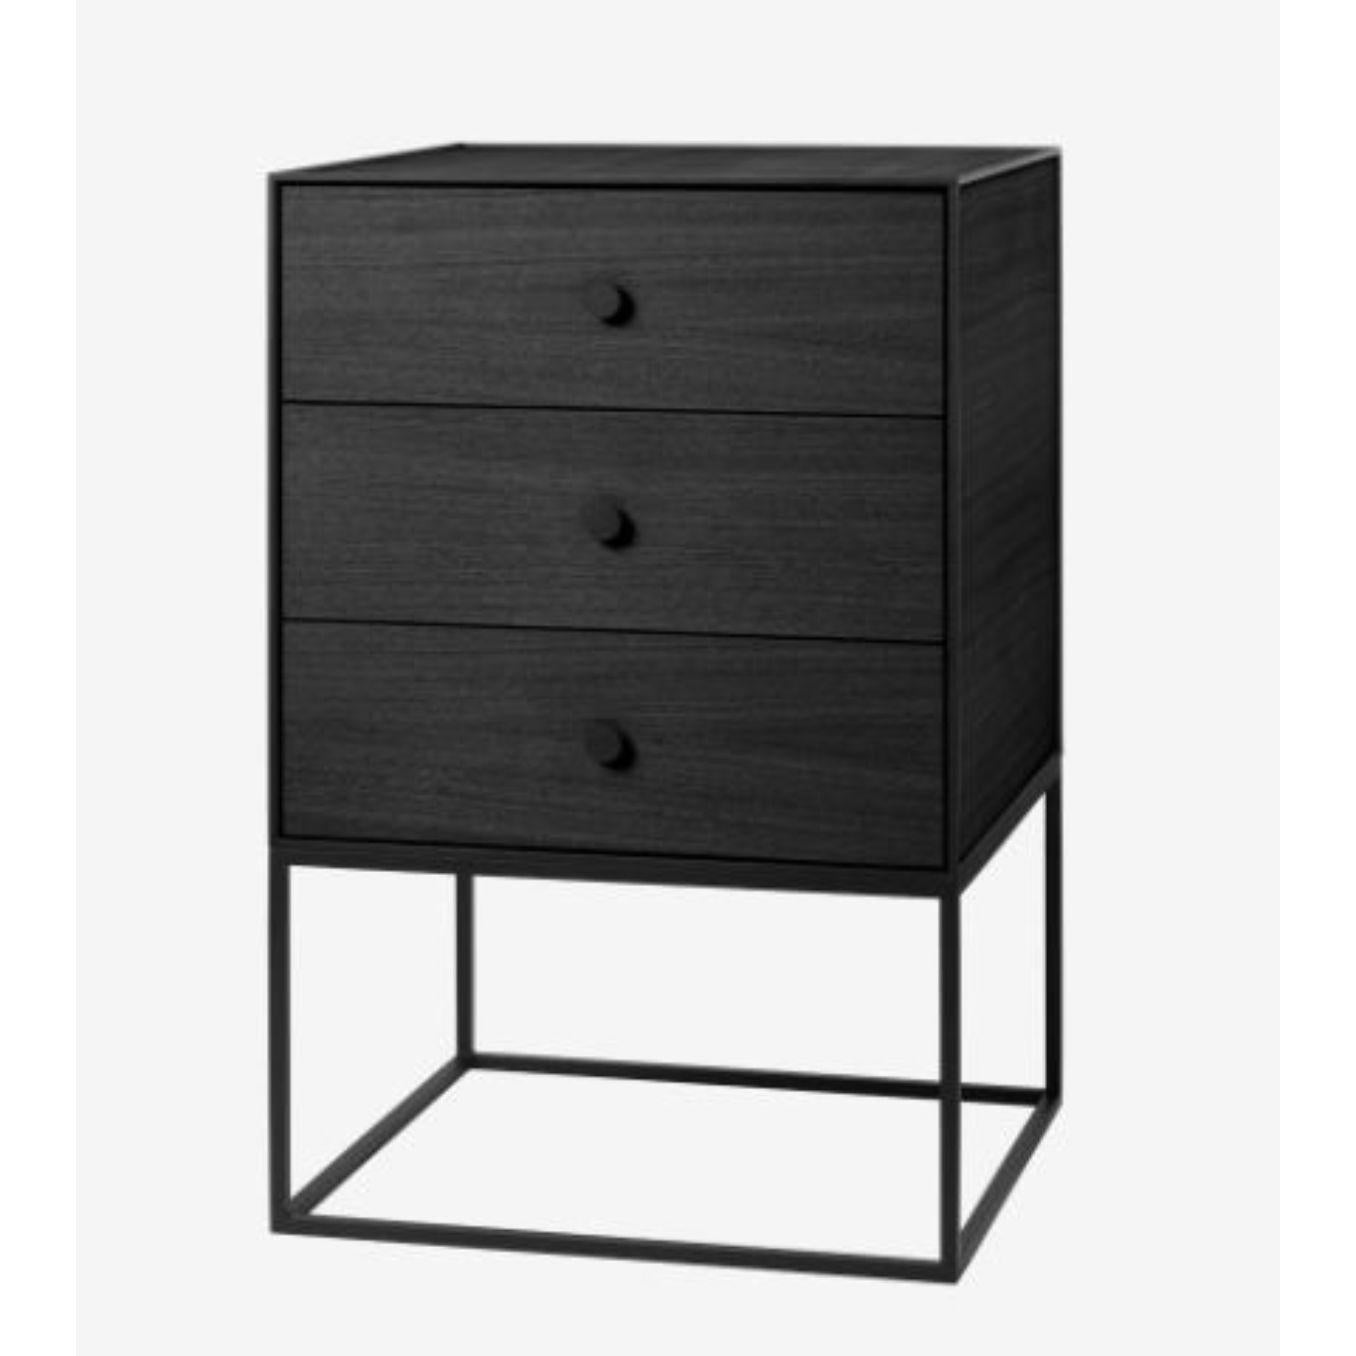 49 black ash frame sideboard with 3 drawers by Lassen.
Dimensions: D 49 x W 42 x H 77 cm 
Materials: Finér, Melamin, Melamine, Metal, Veneer, ash
Also available in different colours and dimensions.
Weight: 21 Kg

By Lassen is a Danish design